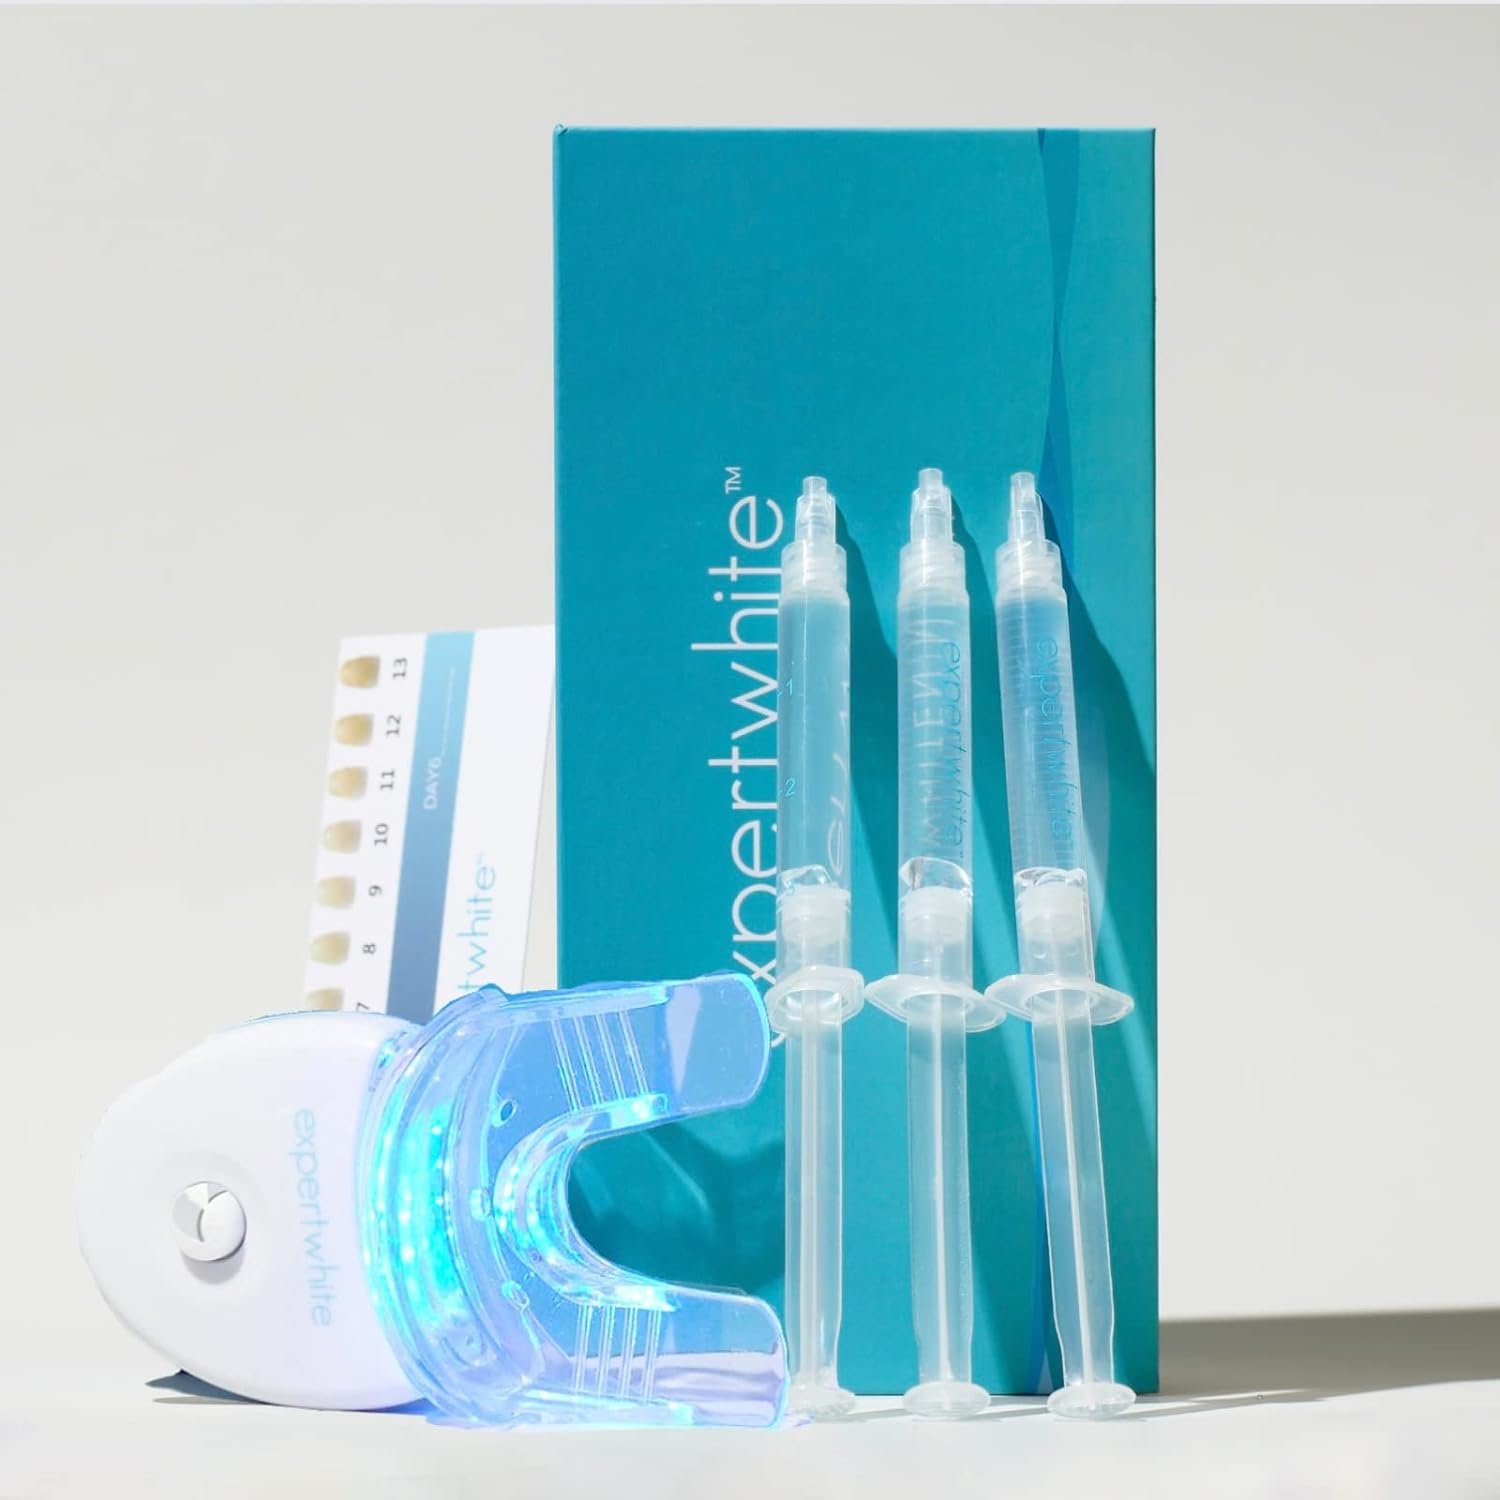 Expertwhite Pro-Grade Teeth Whitening Kit with 32 XLED Accelerator Lights, 35% Carbamide Peroxide Teeth Whitener (12 Treatments). Erases Stains from Coffee, Smoking, Wines, Soda,  Food - Fast!